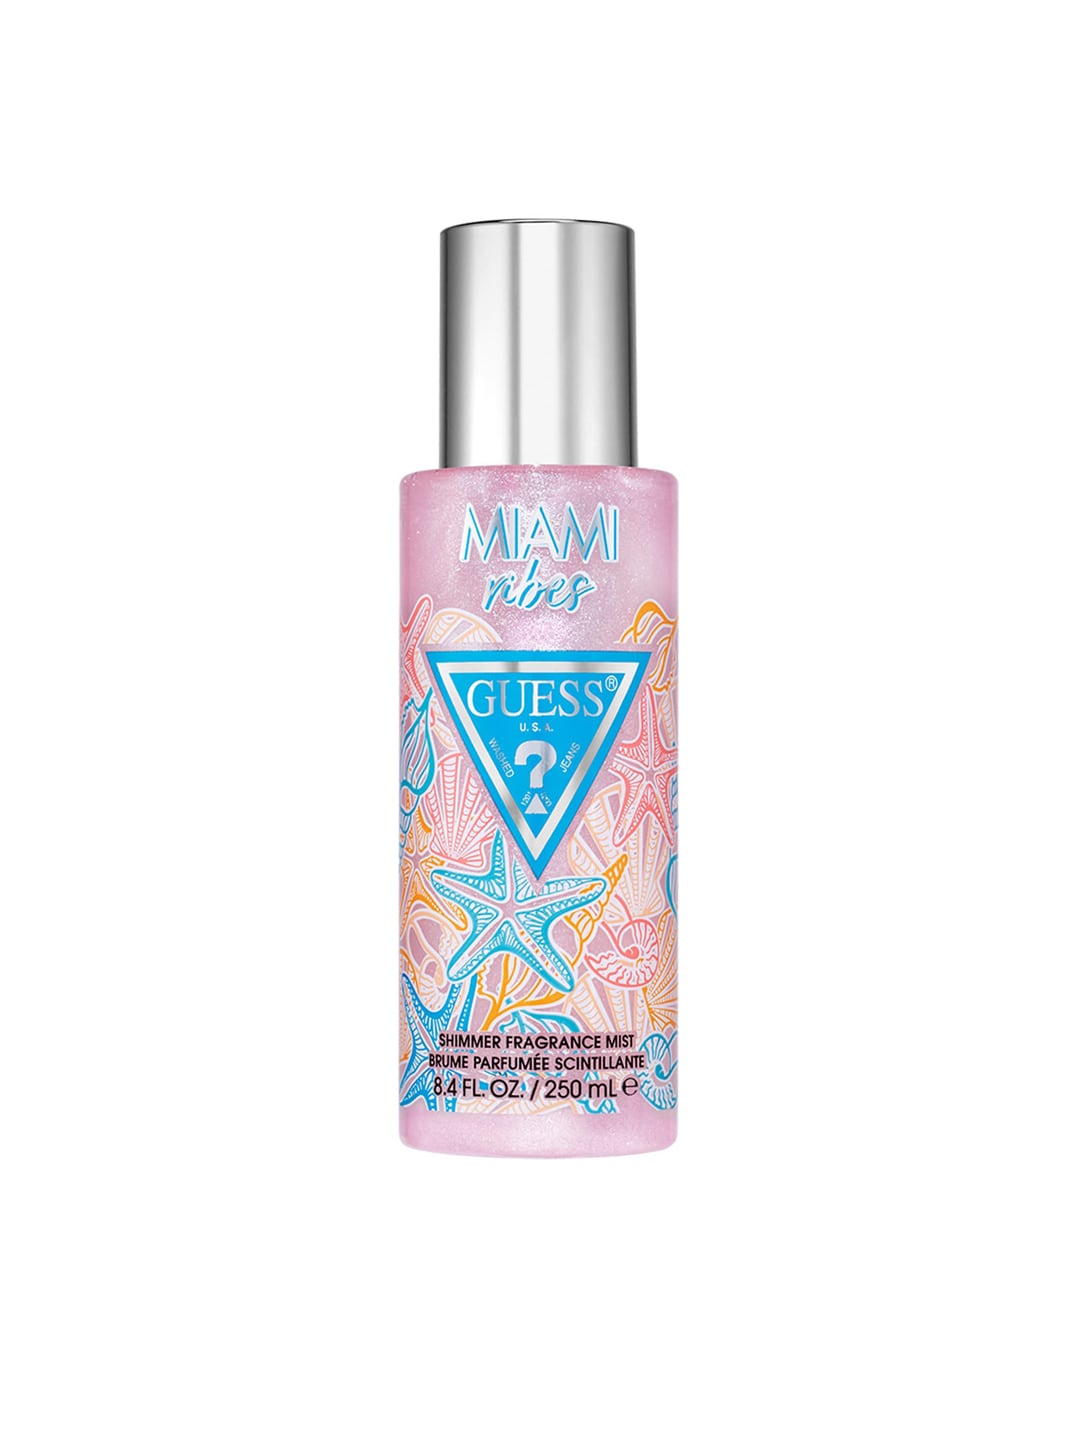 Guess Destination Miami Vibes Shimmer Fragrance Body Mist 250ml Price in India